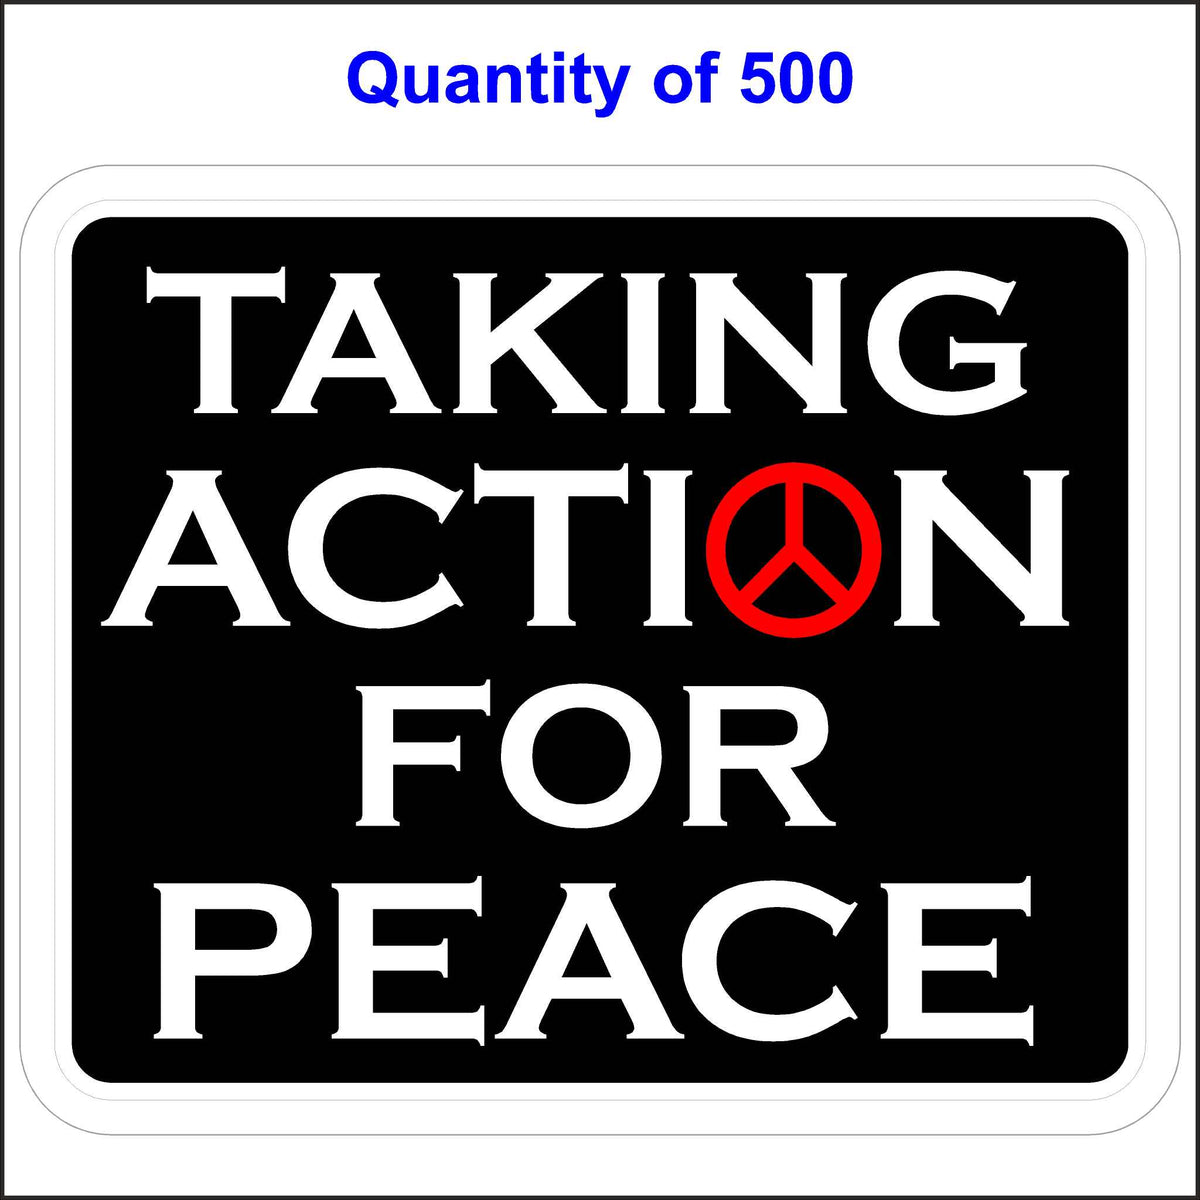 Taking Action For Peace - Peace Stickers. 500 Quantity.